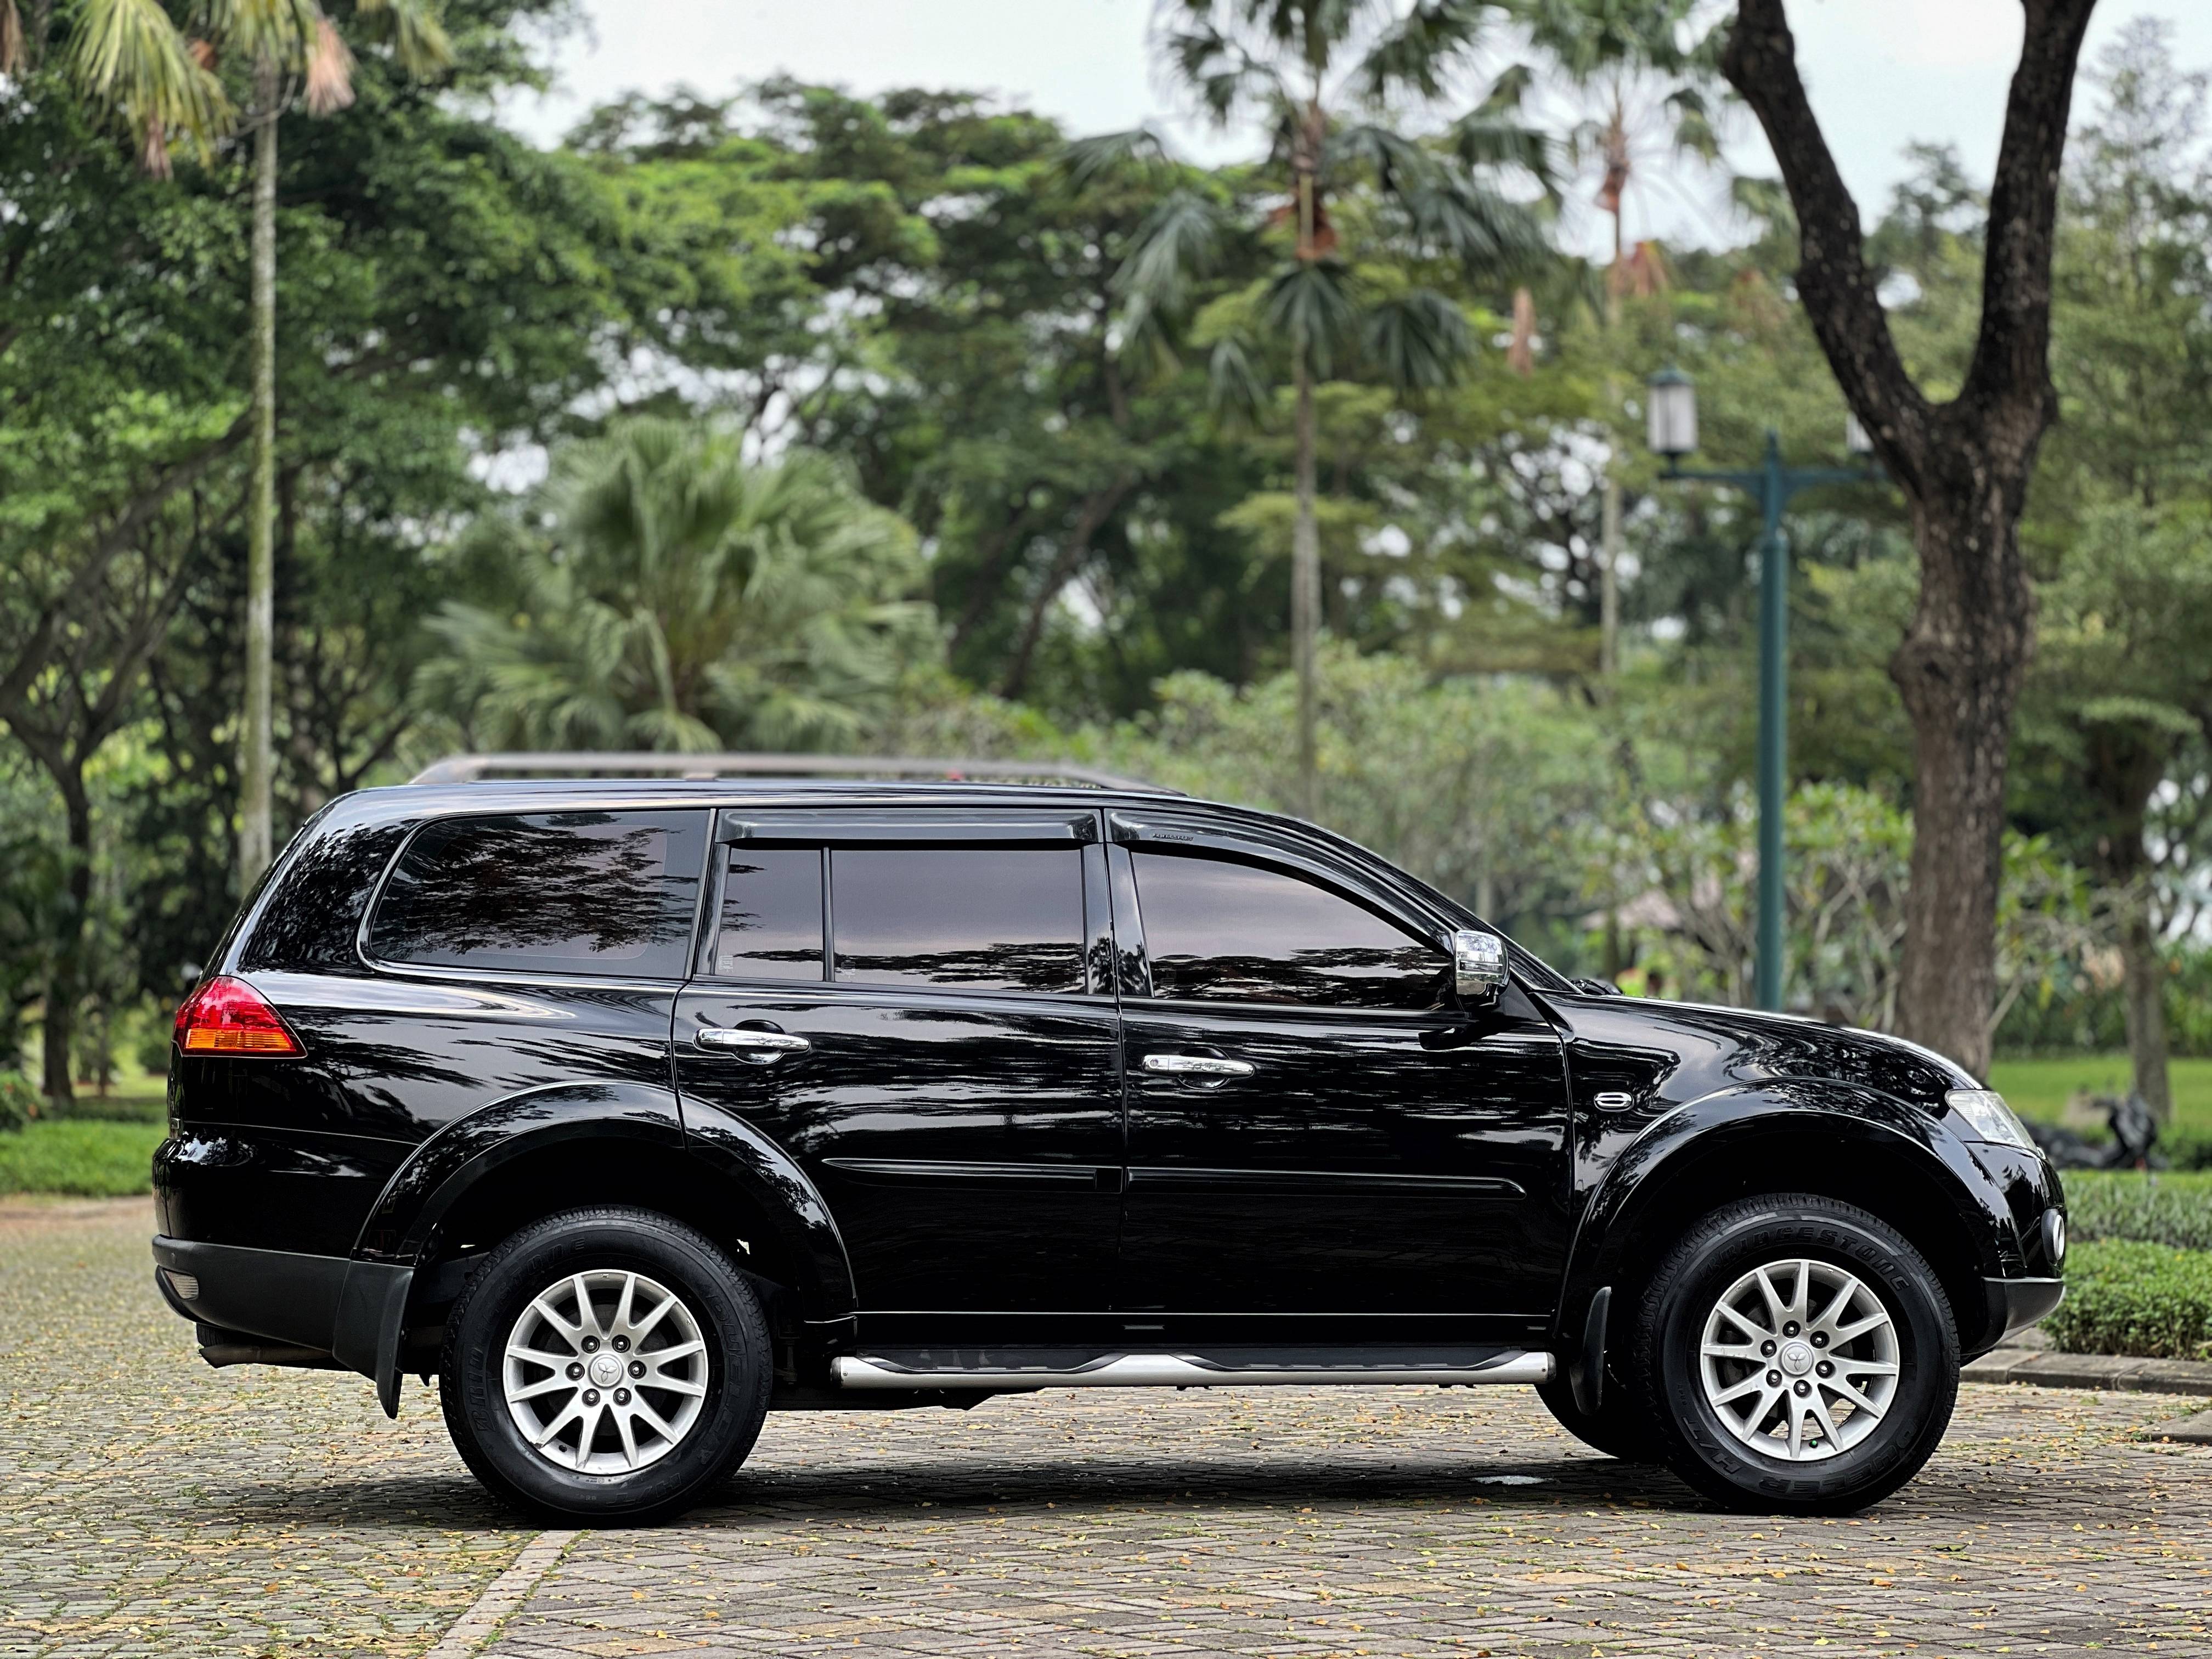 Old 2012 Mitsubishi Pajero 2.5 EXCEED 4X2 A/T JEP 2.5 EXCEED 4X2 A/T JEP